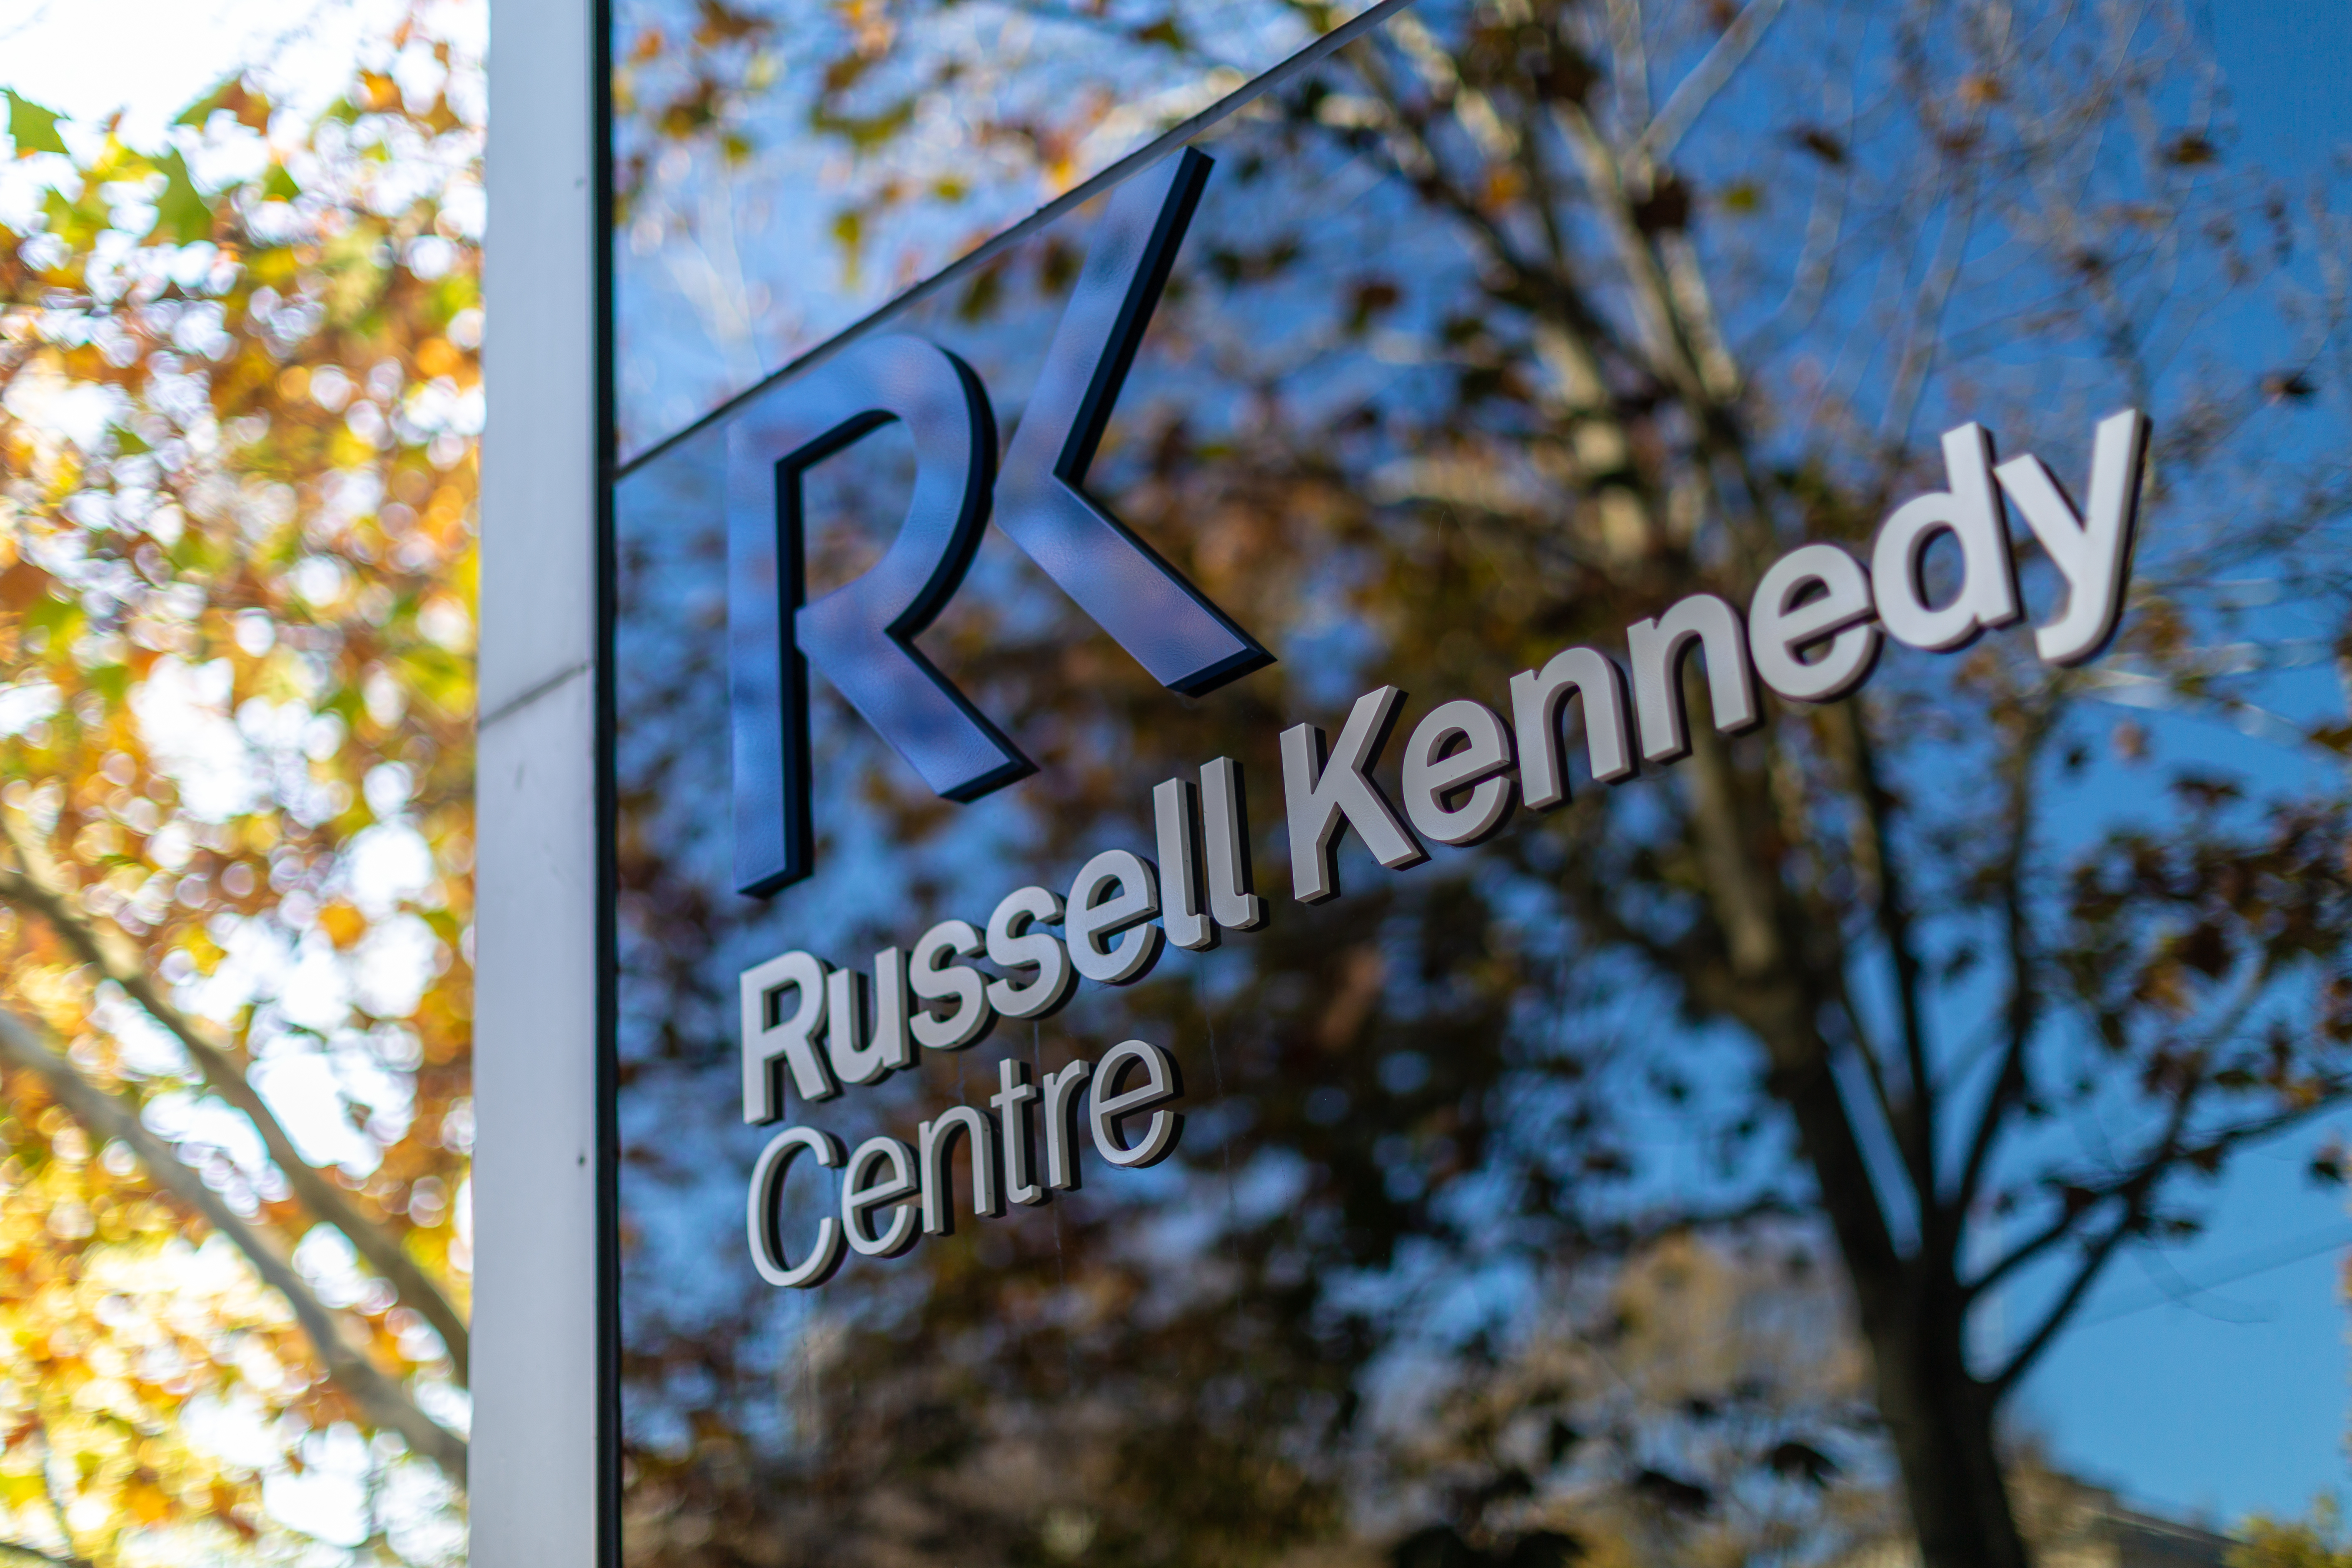 Russell Kennedy Signage 3